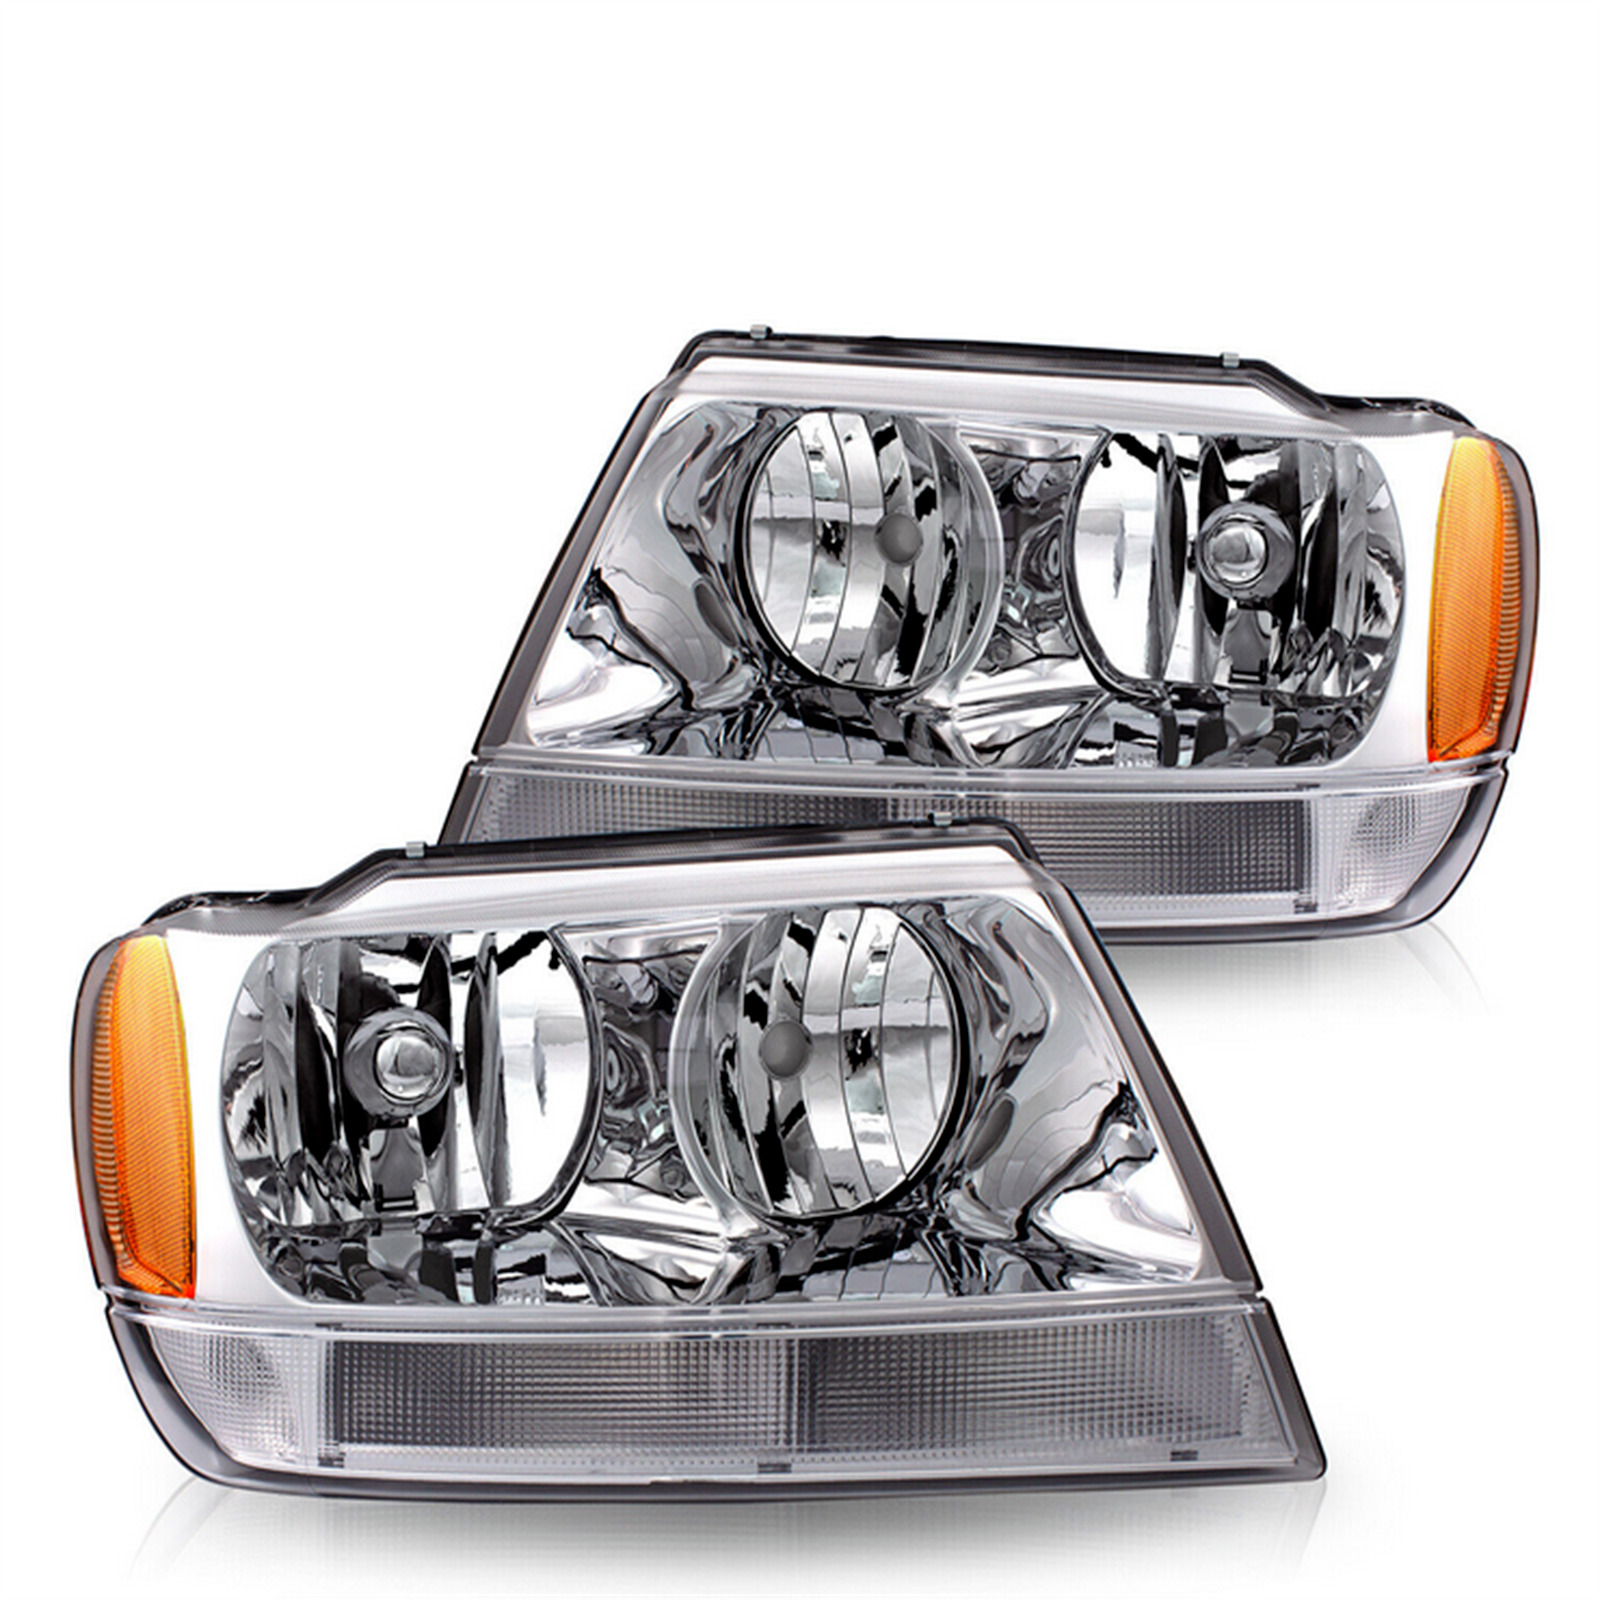 Fit For 1999-2004 Jeep Grand Cherokee Headlamps Pair Chrome Headlights Assembly